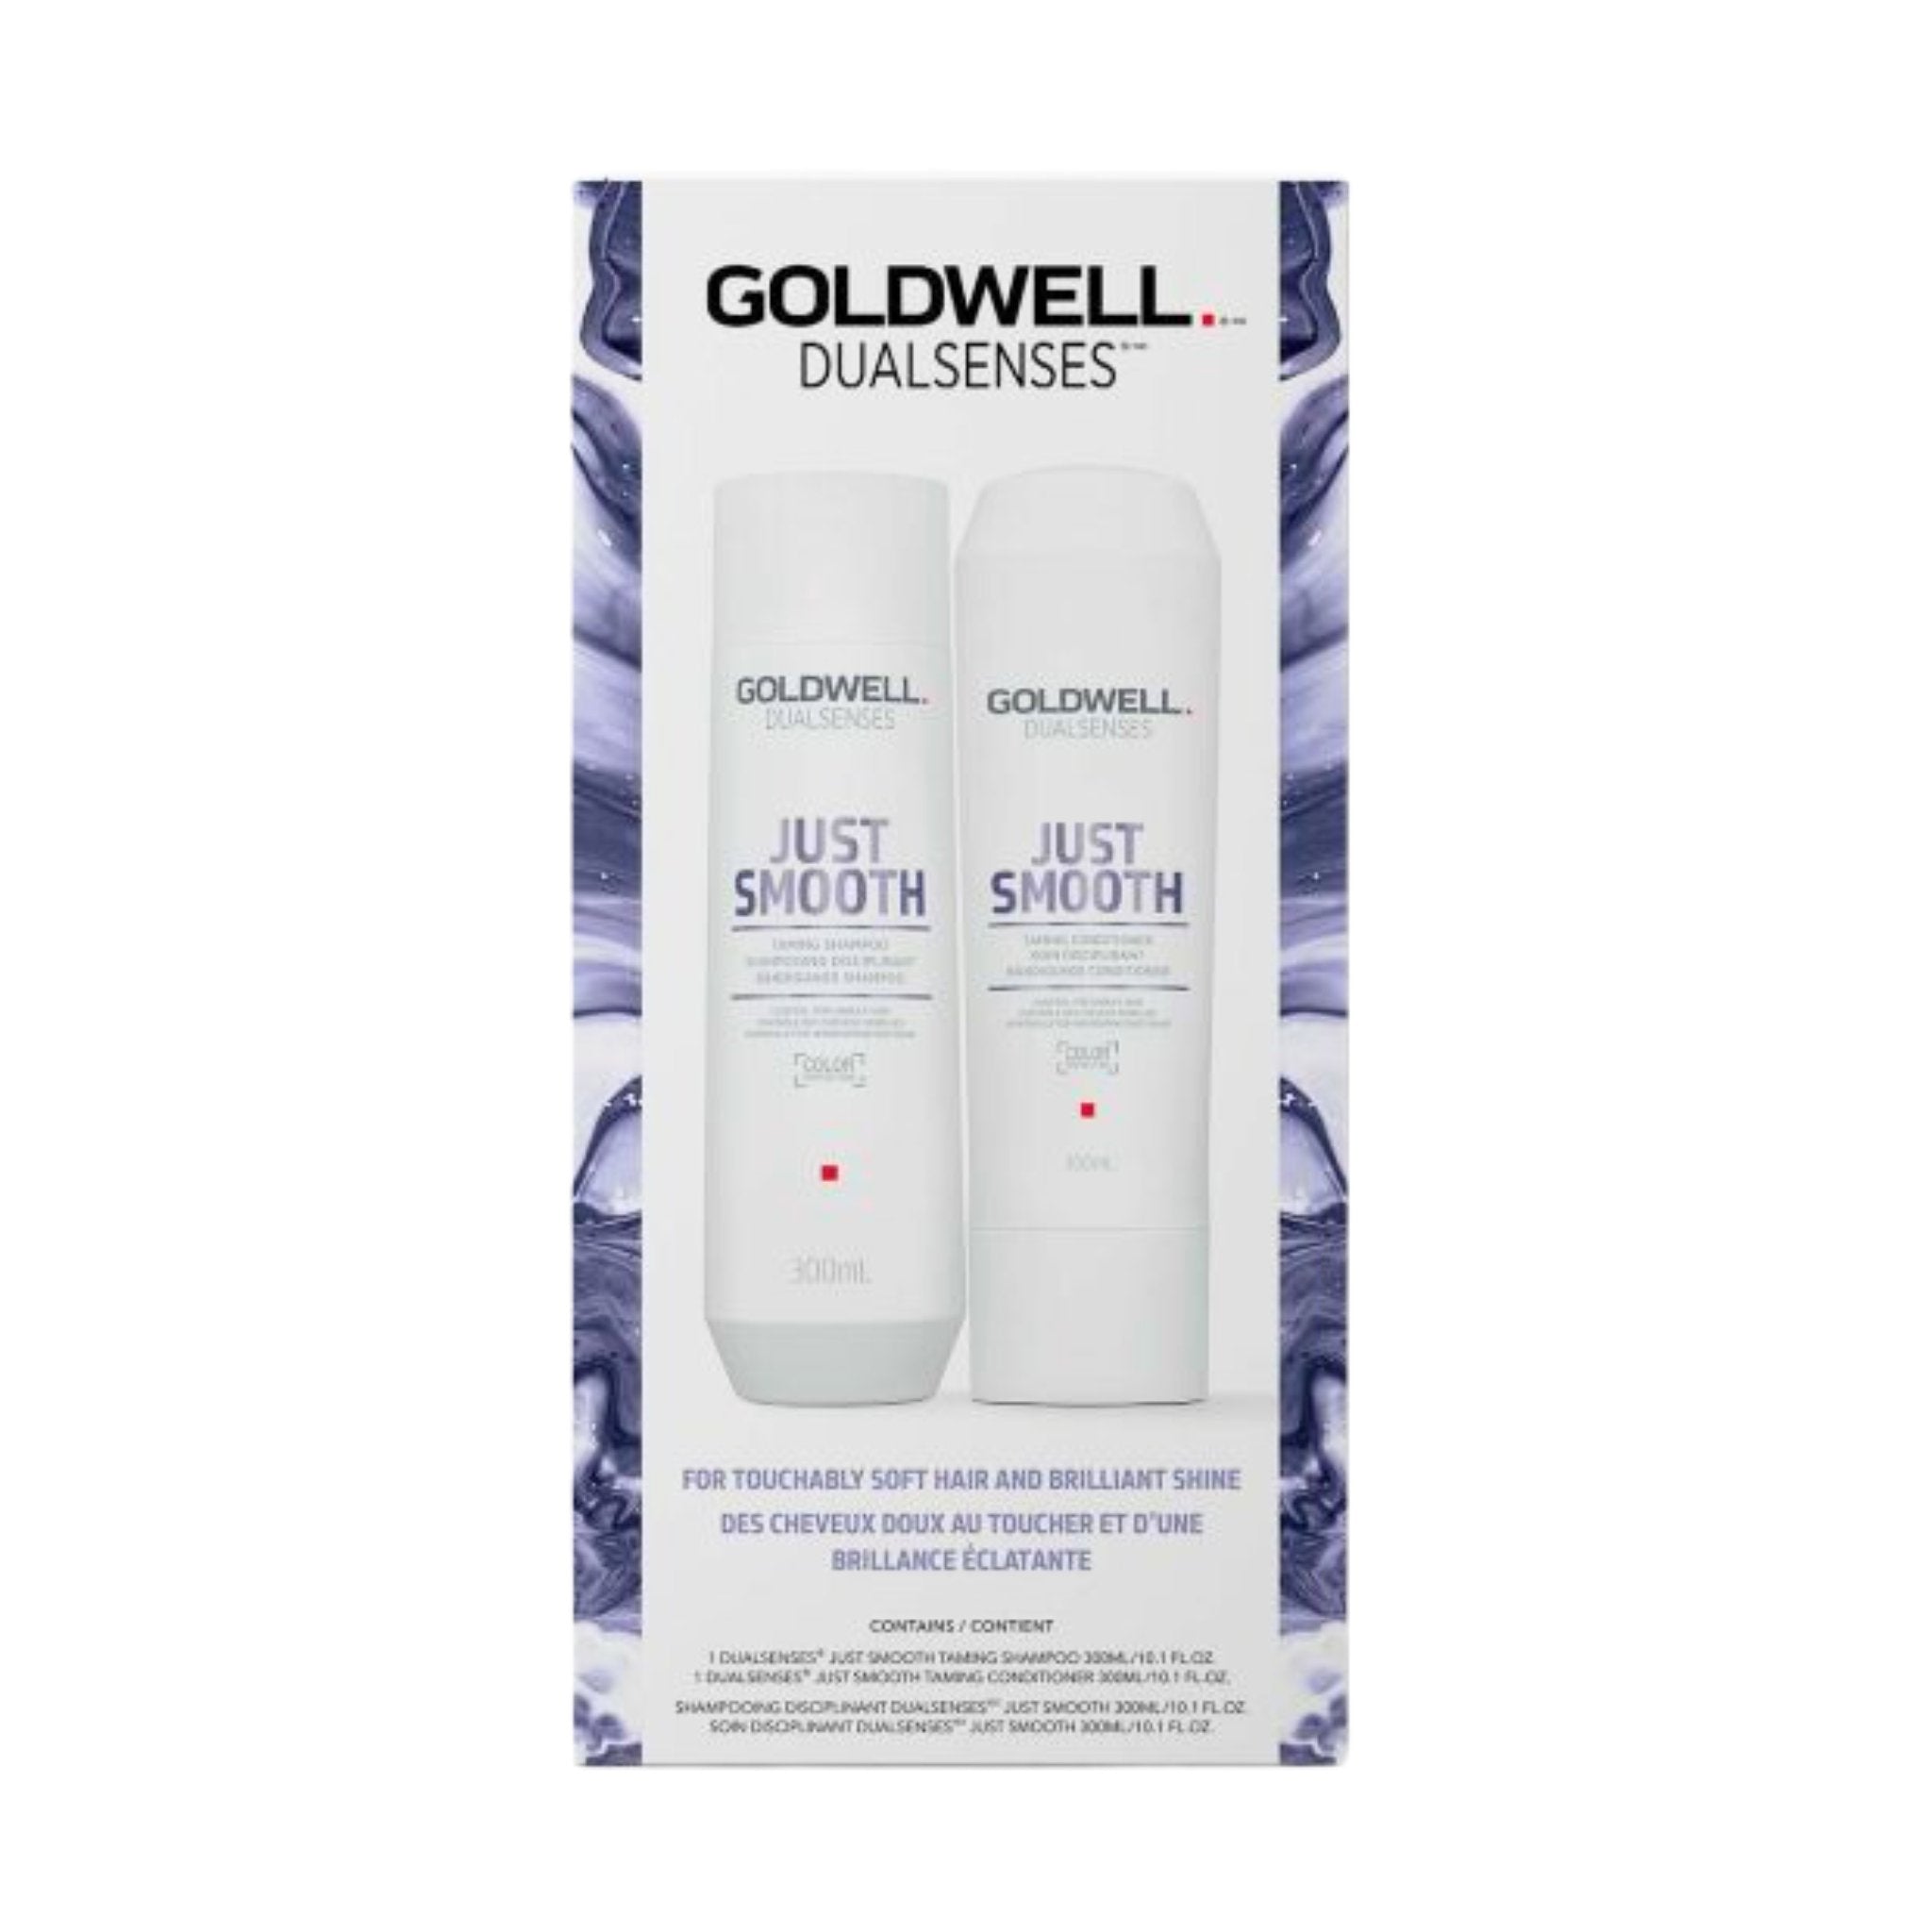 Goldwell. Duo Printanier Just Smooth - Concept C. Shop